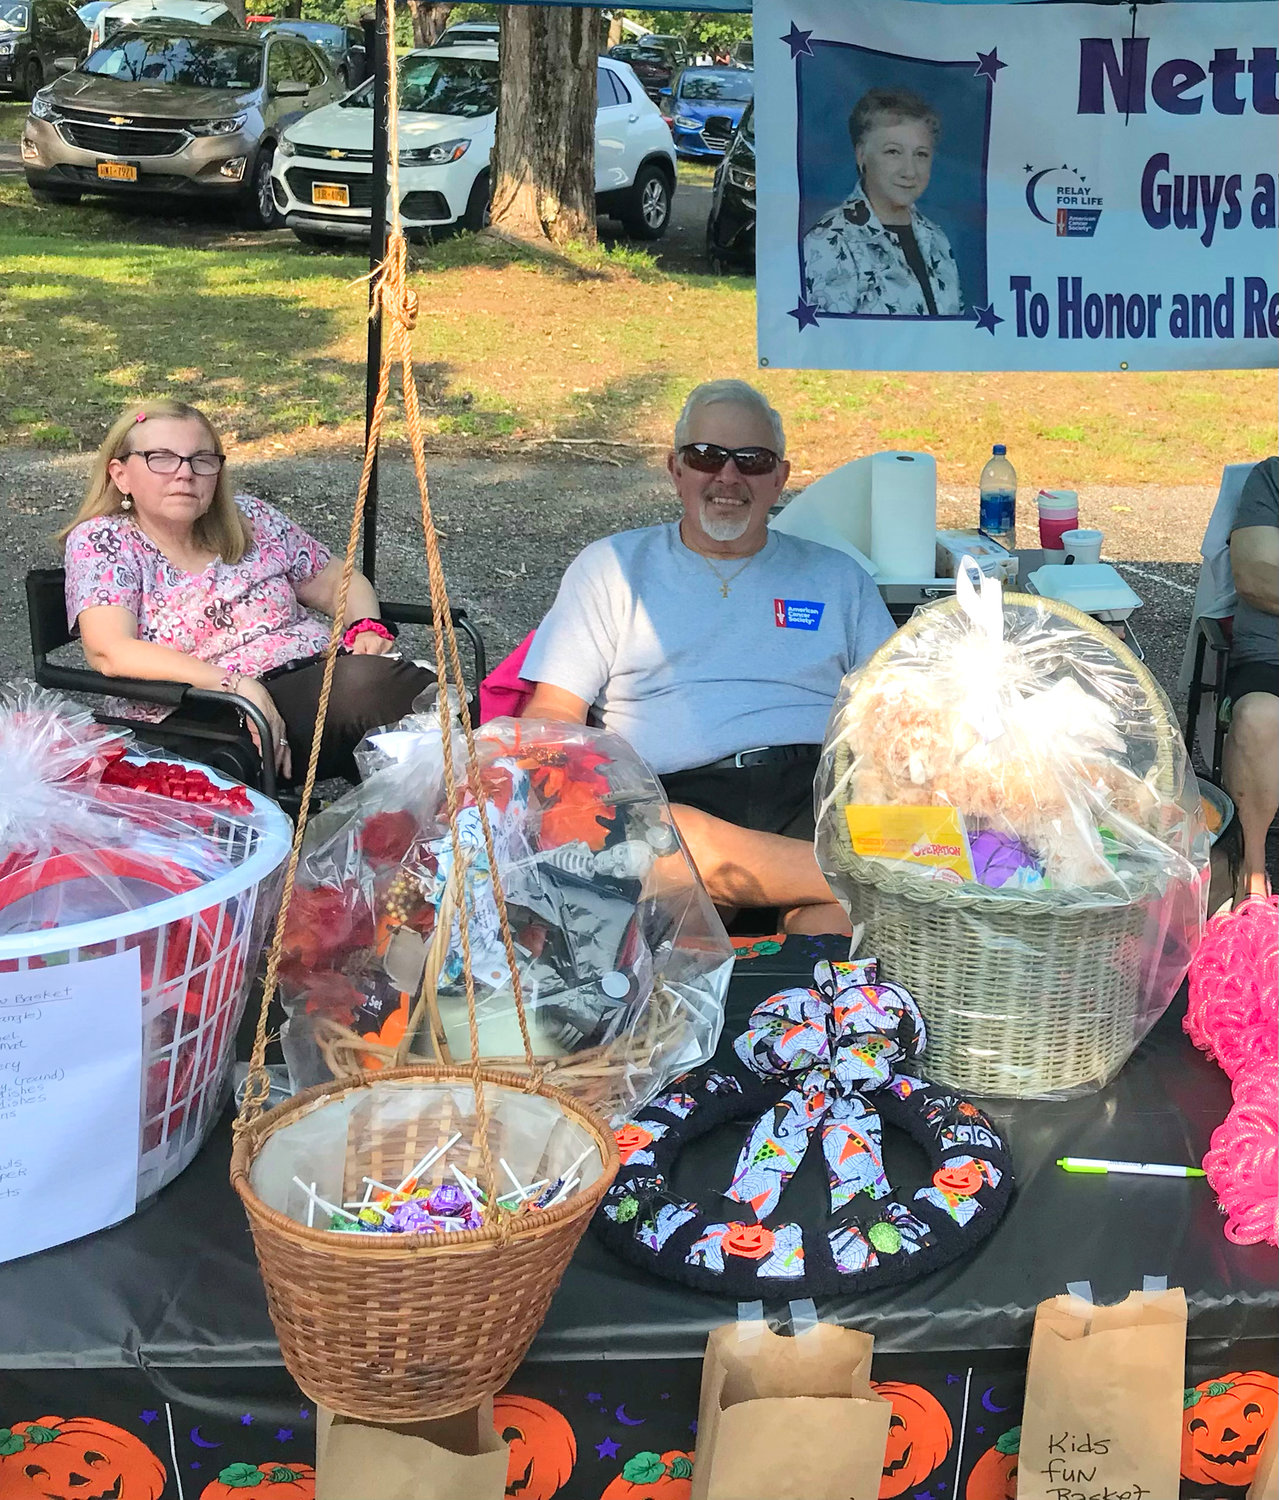 Jackie, left, and Bernie Szczesniak pose Sept. 17 at the Relay for Life of Central New York in Rome. Bernie is the captain of the Nettie’s Guys &amp; Gals team that helps raise funds for the American Cancer Society.